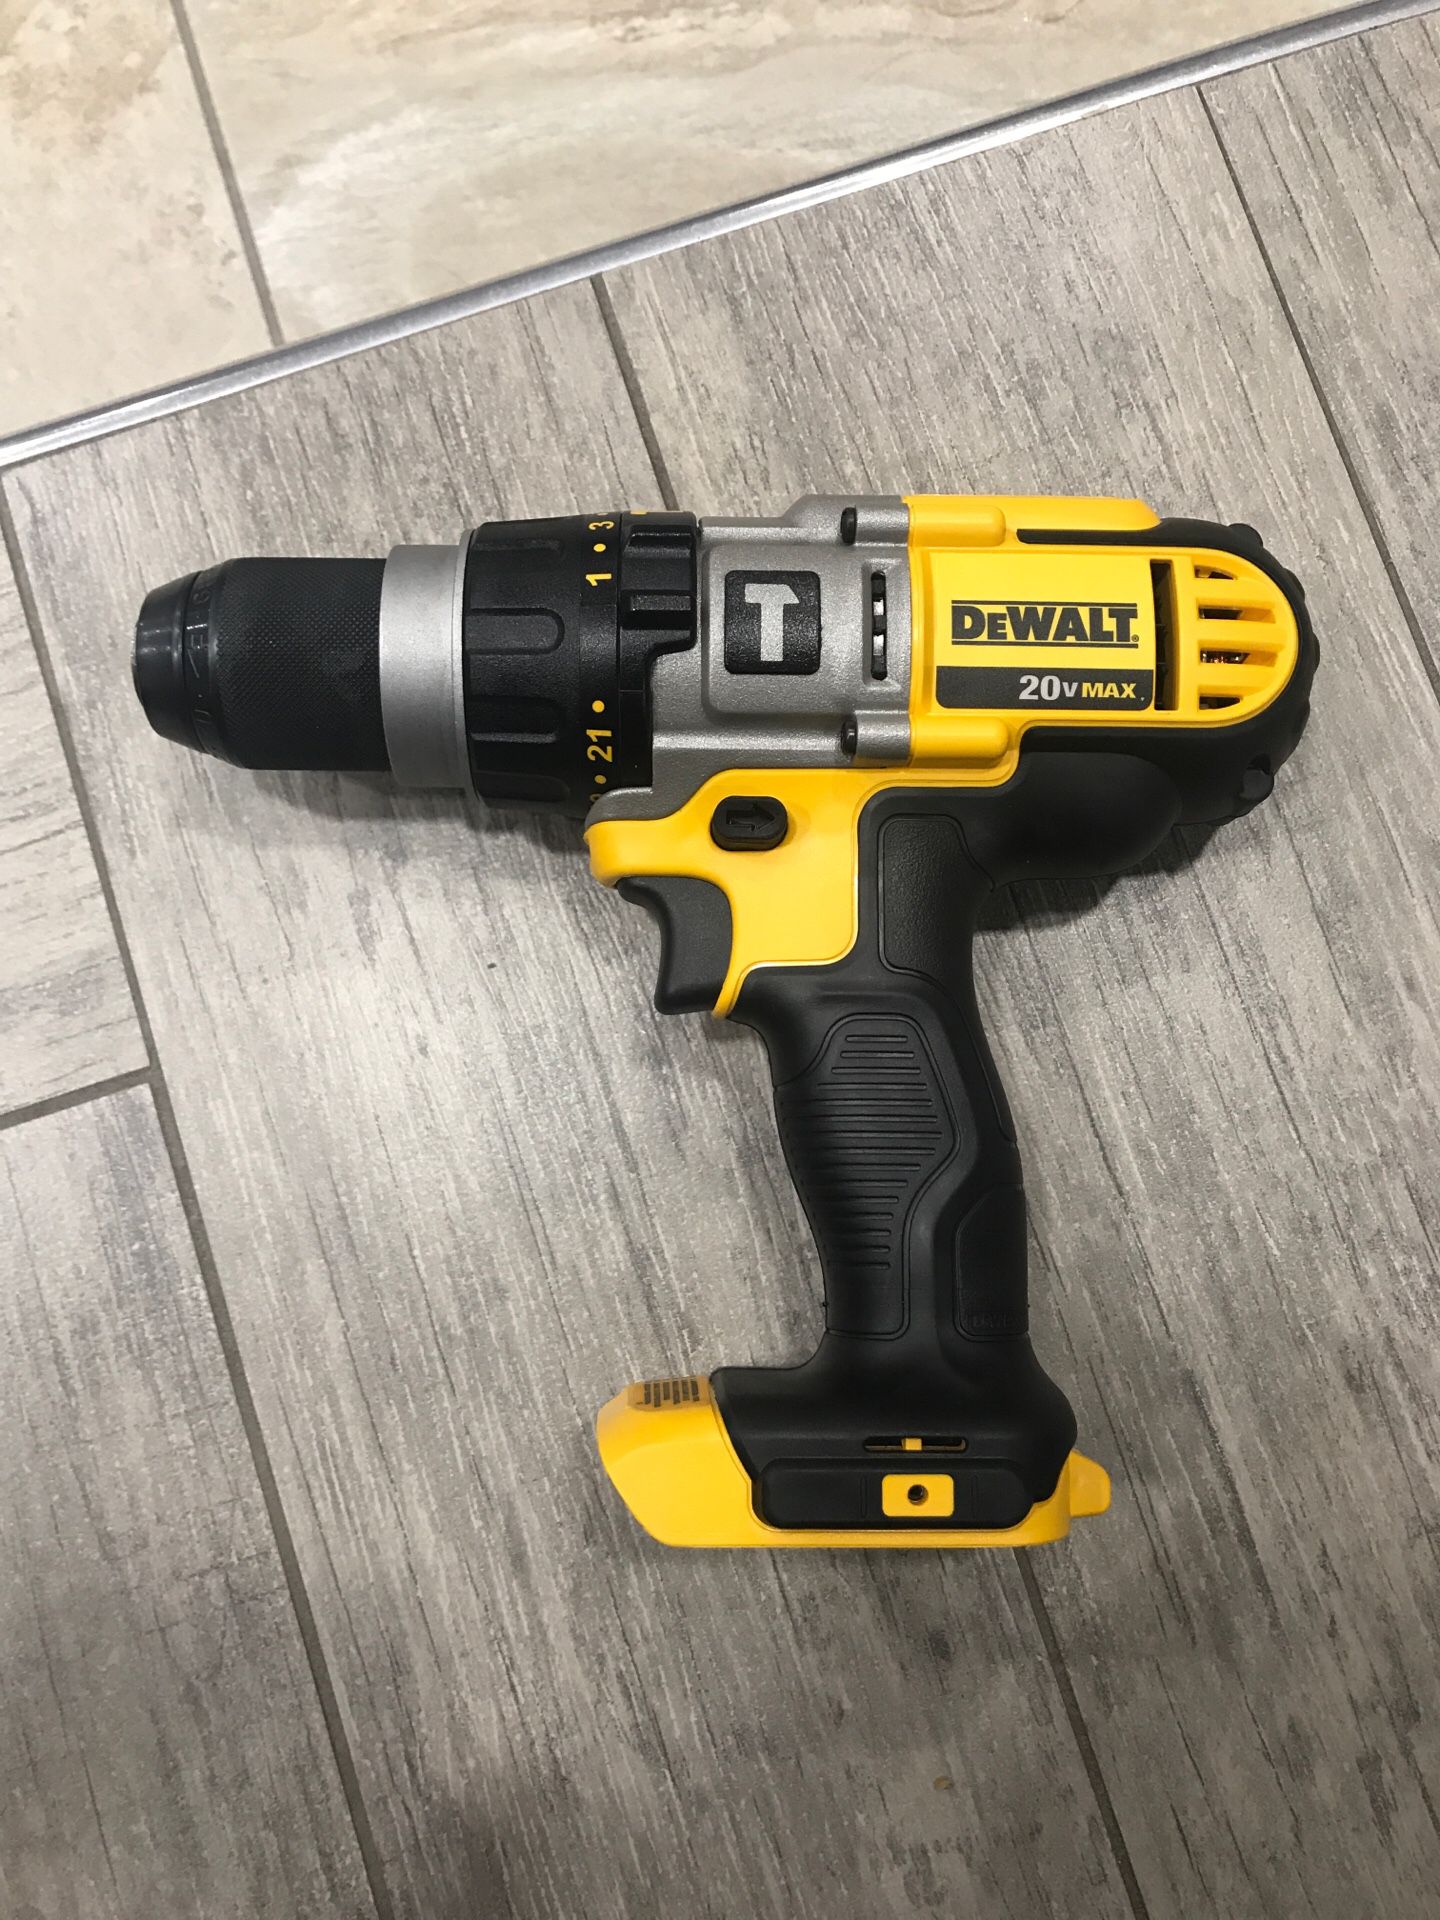 Brand new hammer drill never been used